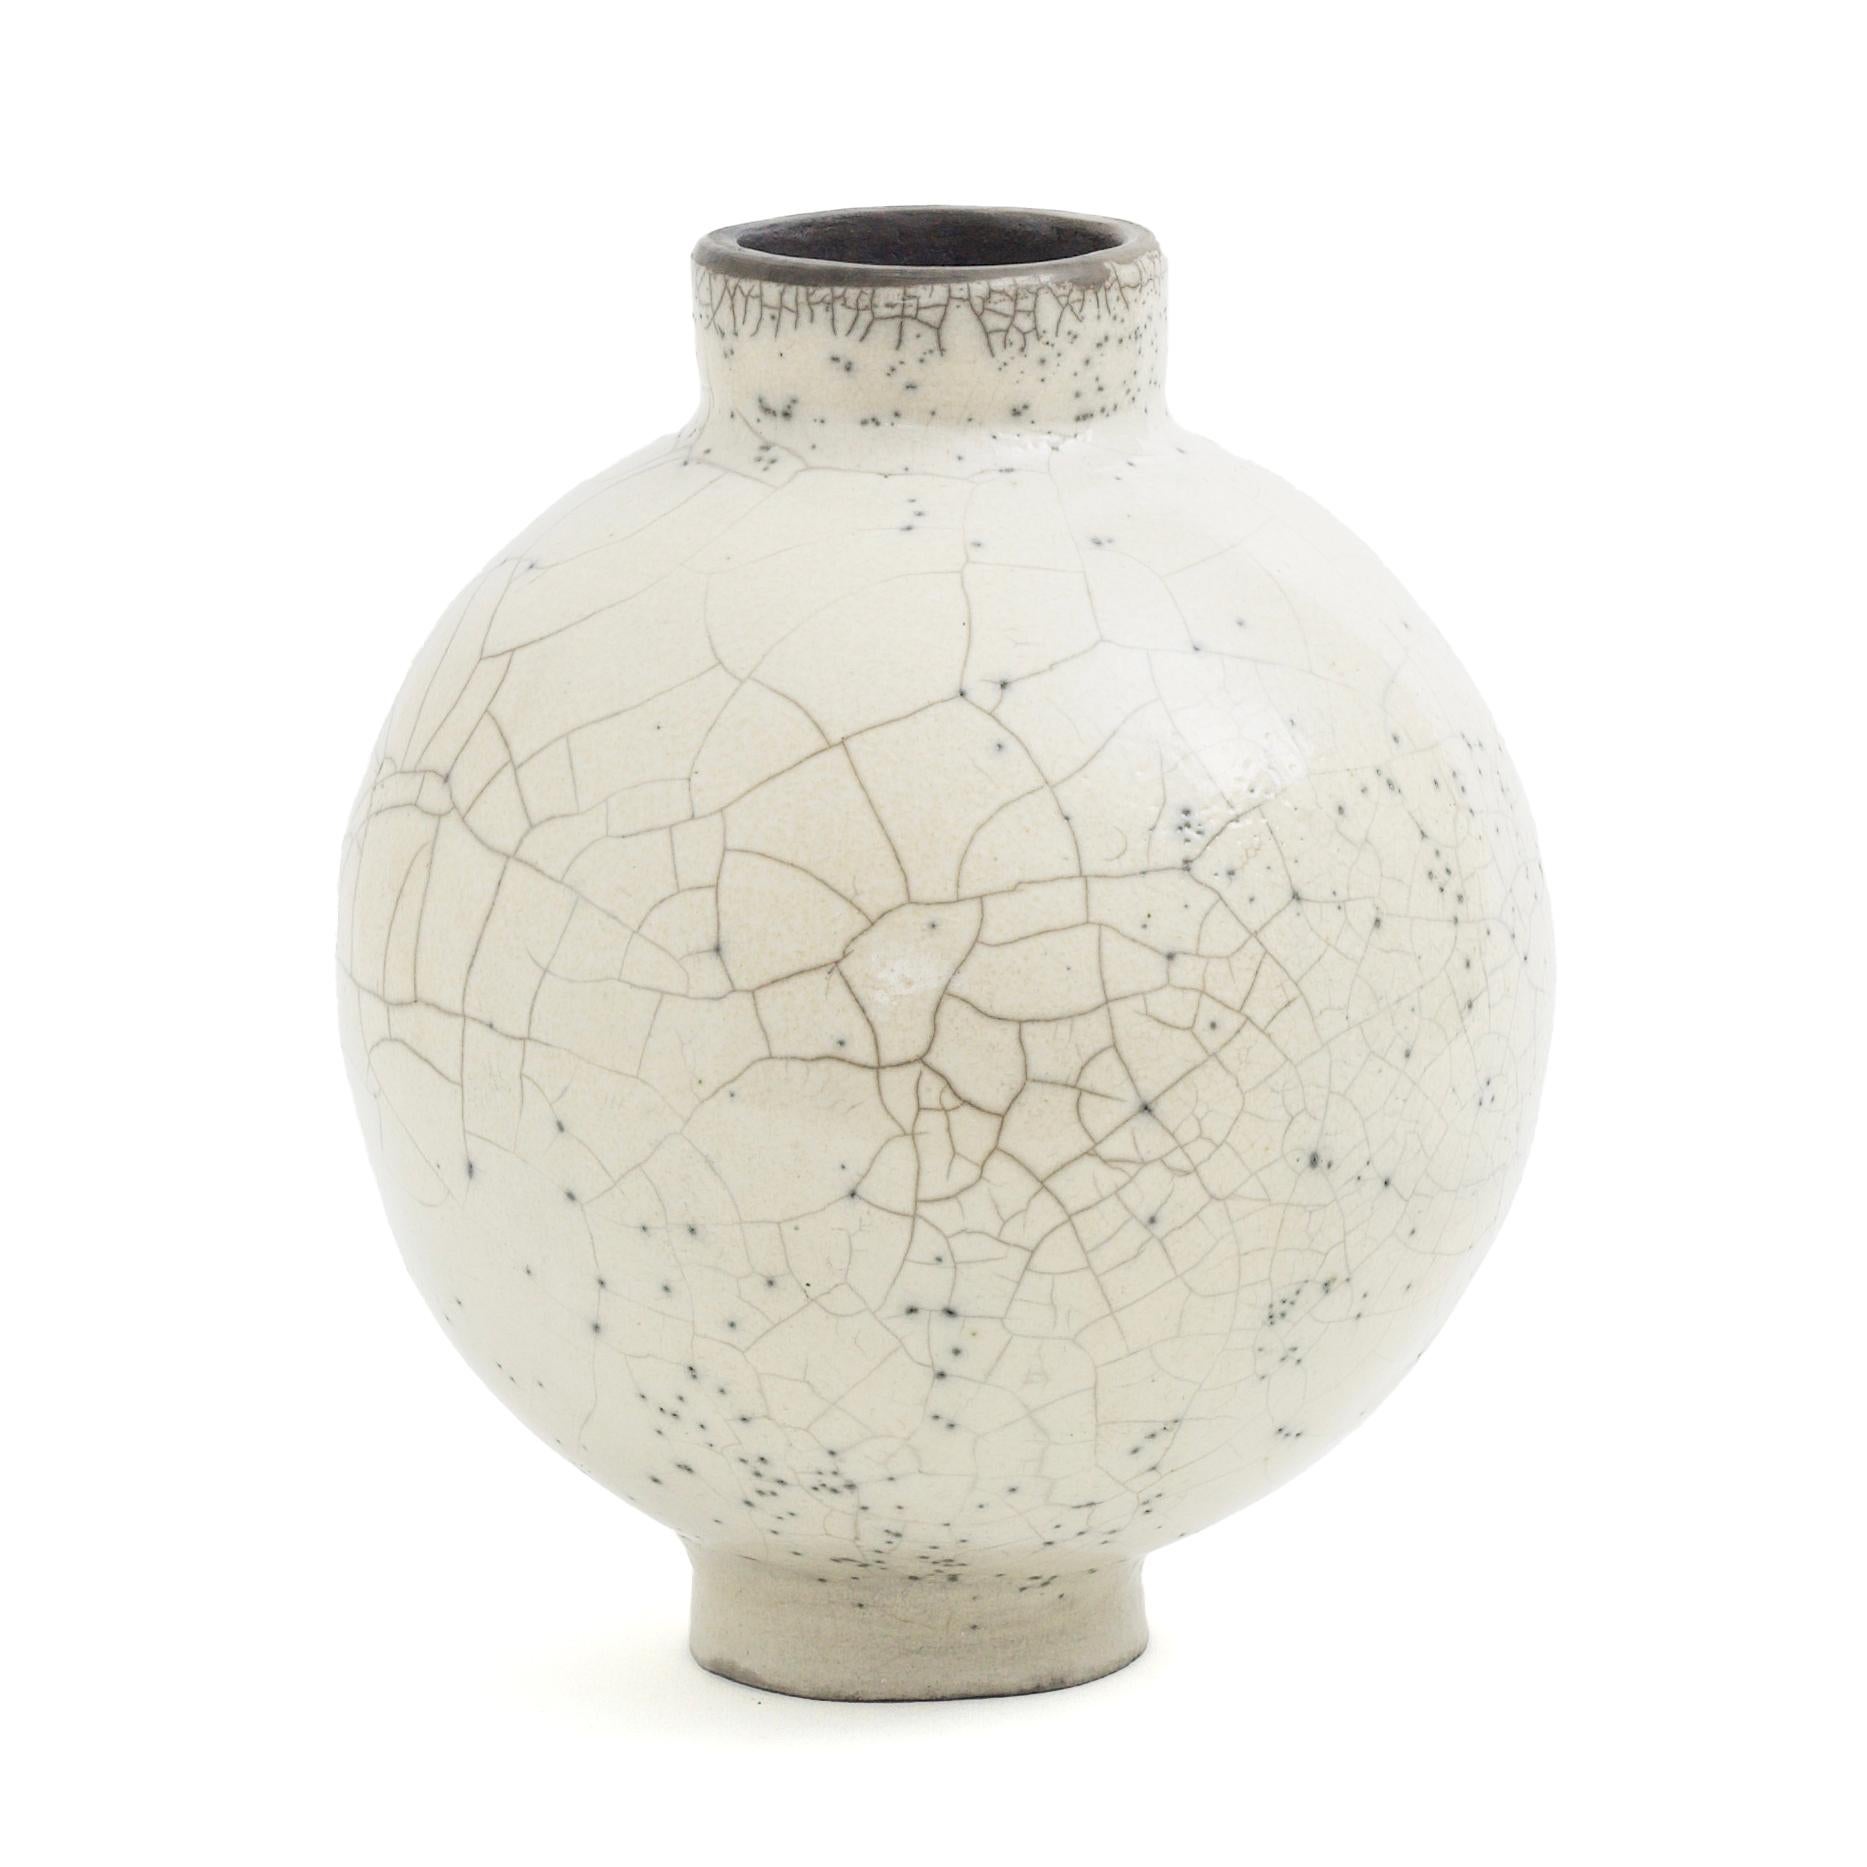 Dome vase

Singular, unpredictable cracks and tiny speckles distinguish the captivating aesthetic of this vase, featuring a cylindrical base and mouth incorporated within the spherical body. Minutely handcrafted of ceramic following the ancient